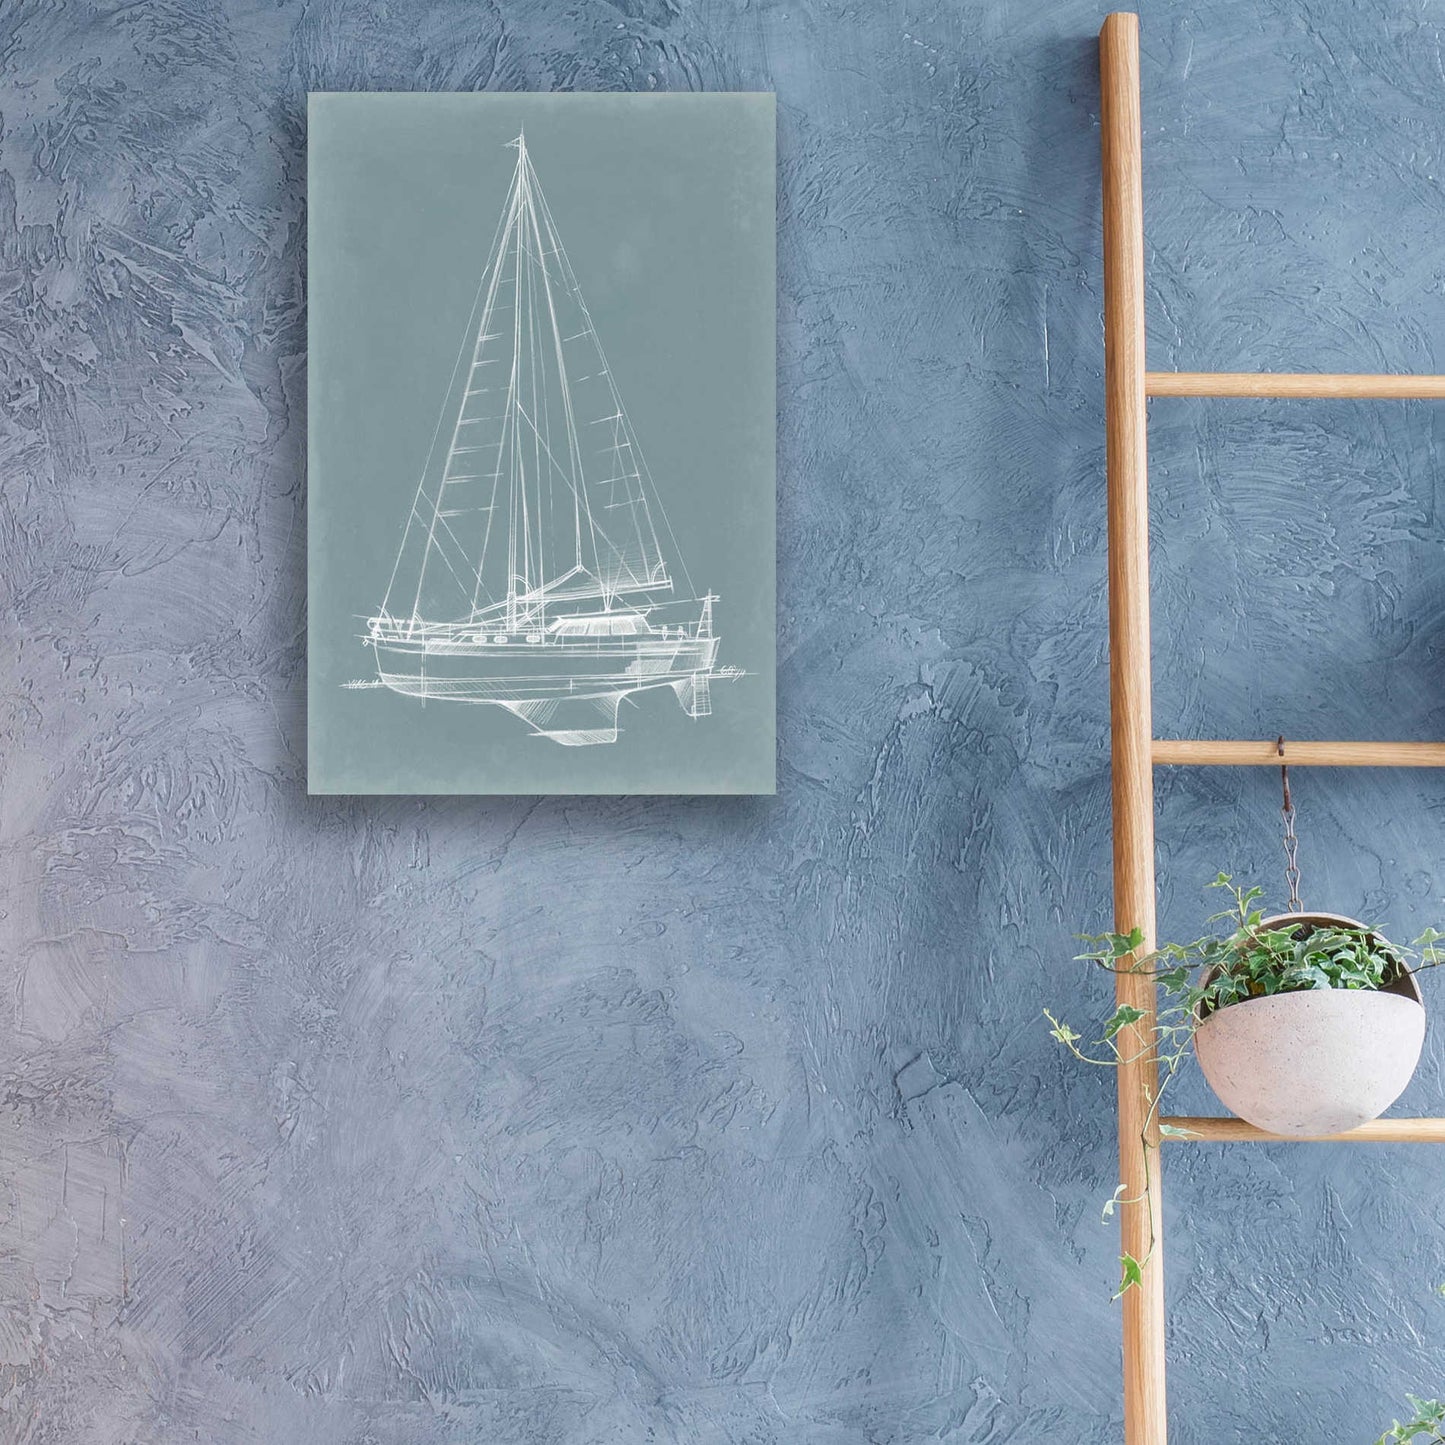 Epic Art "Yacht Sketches I" by Ethan Harper, Acrylic Glass Wall Art,16x24